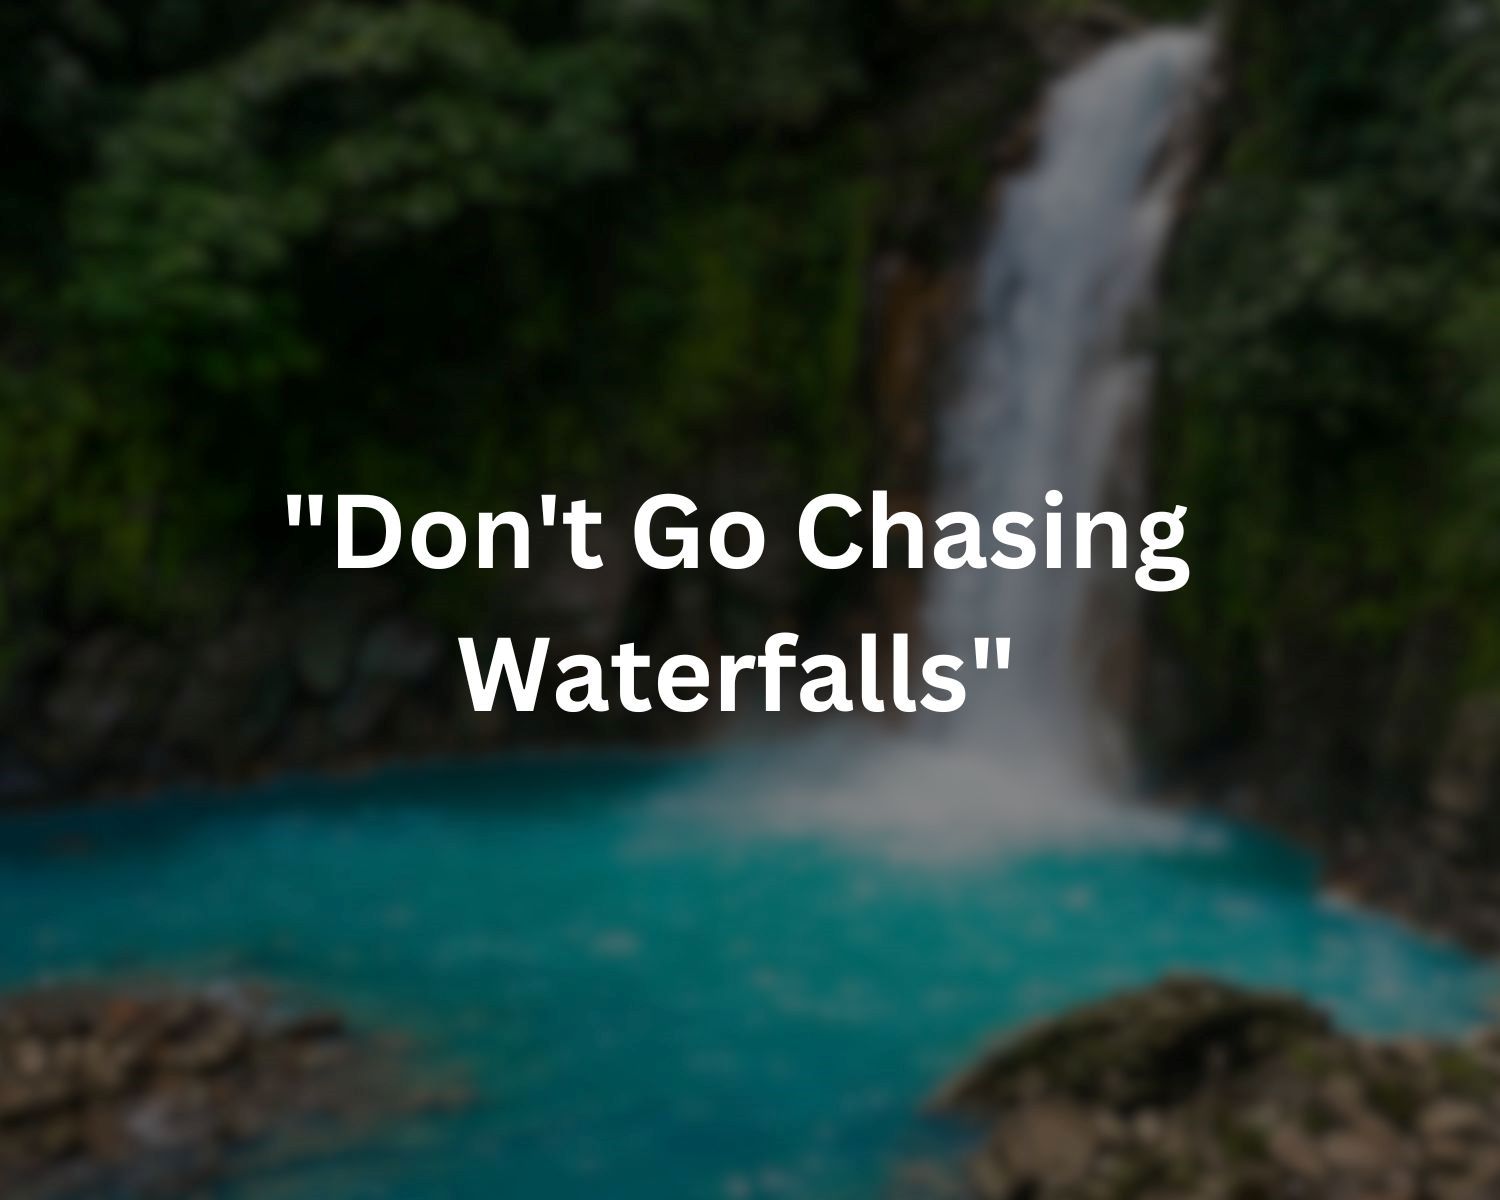 Understanding The Meaning Of The Expression “Don’t Go Chasing Waterfalls”